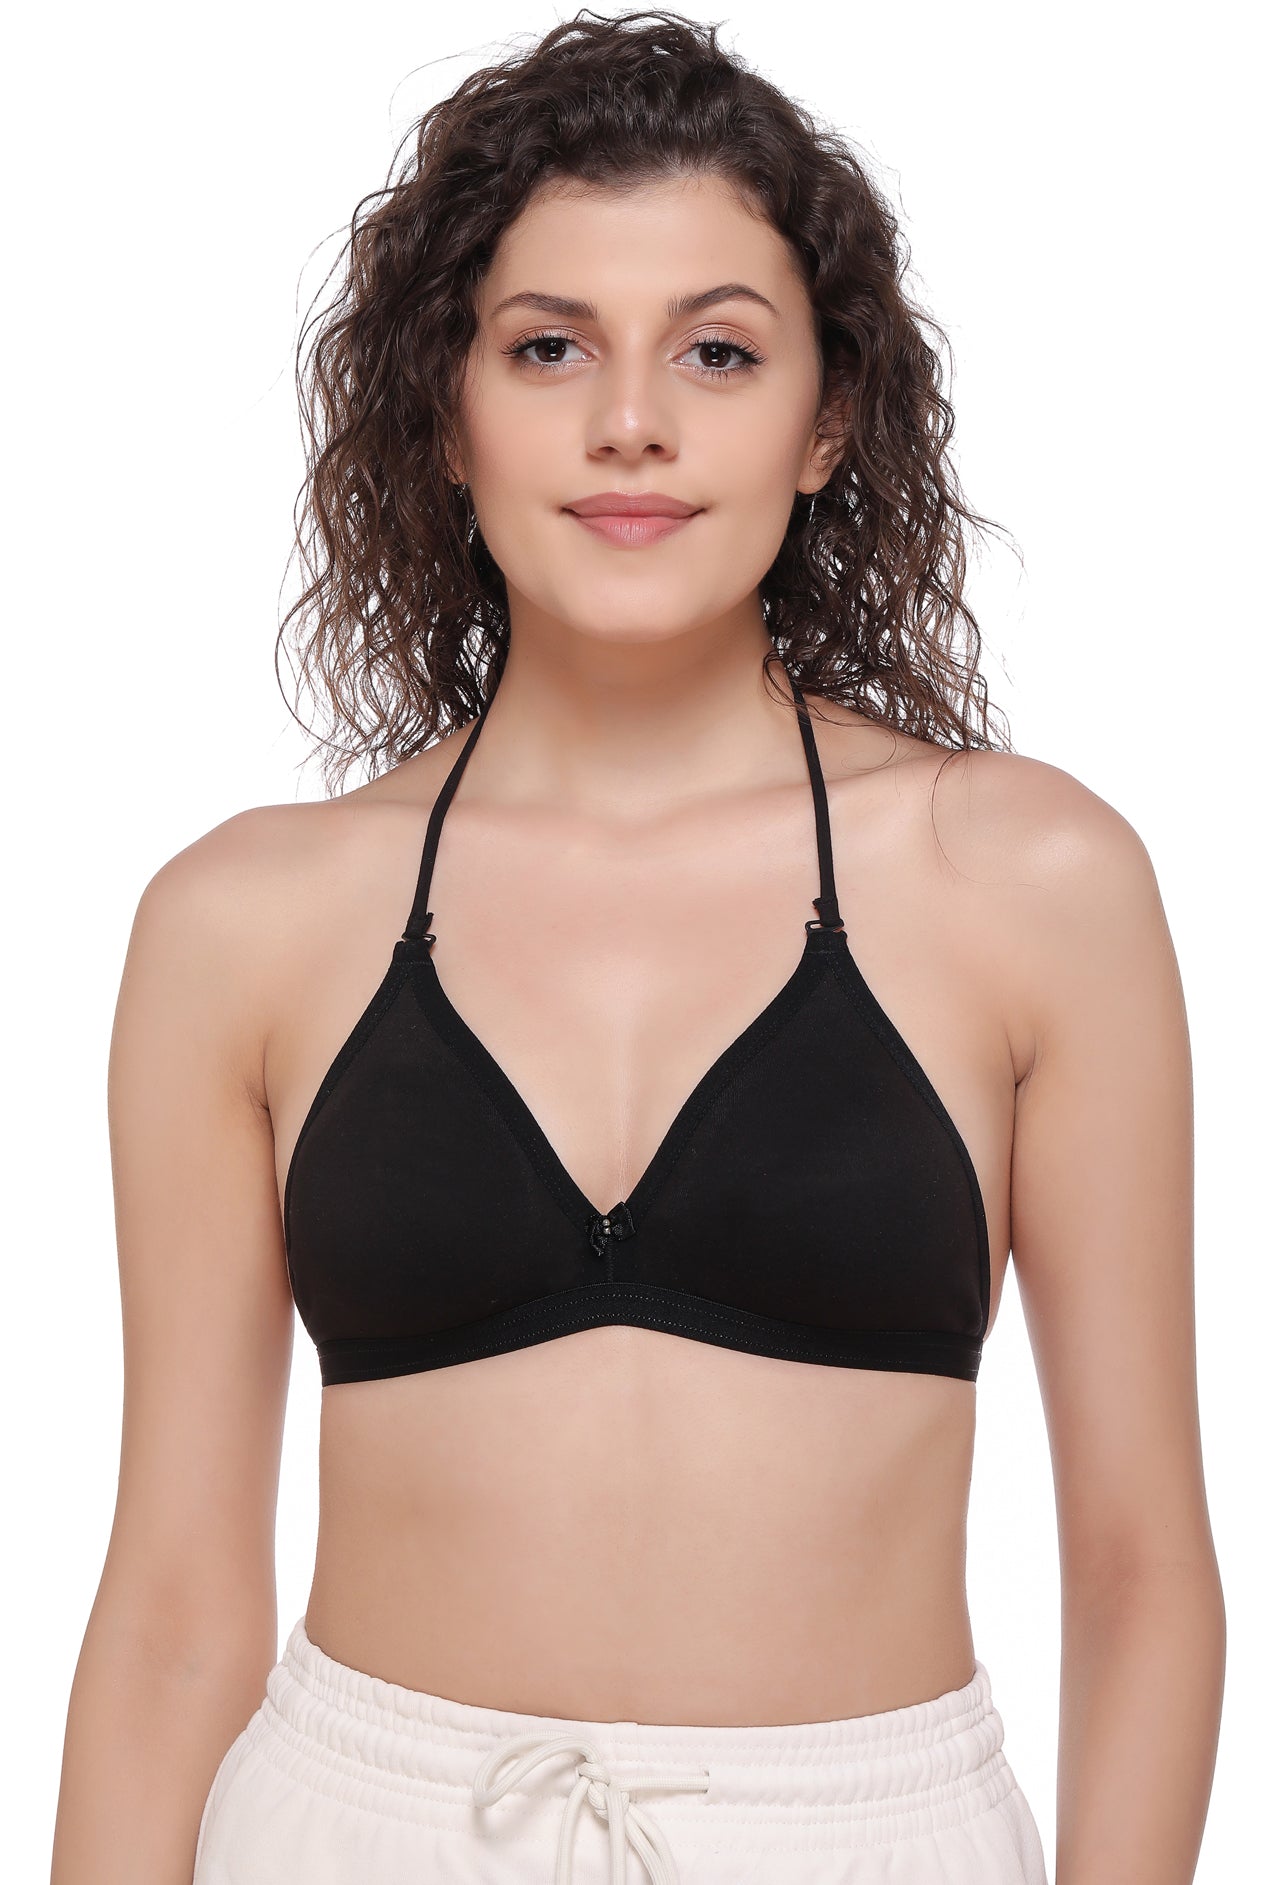 Buy online Halter Solid T-shirt Bra from lingerie for Women by Madam for  ₹221 at 75% off